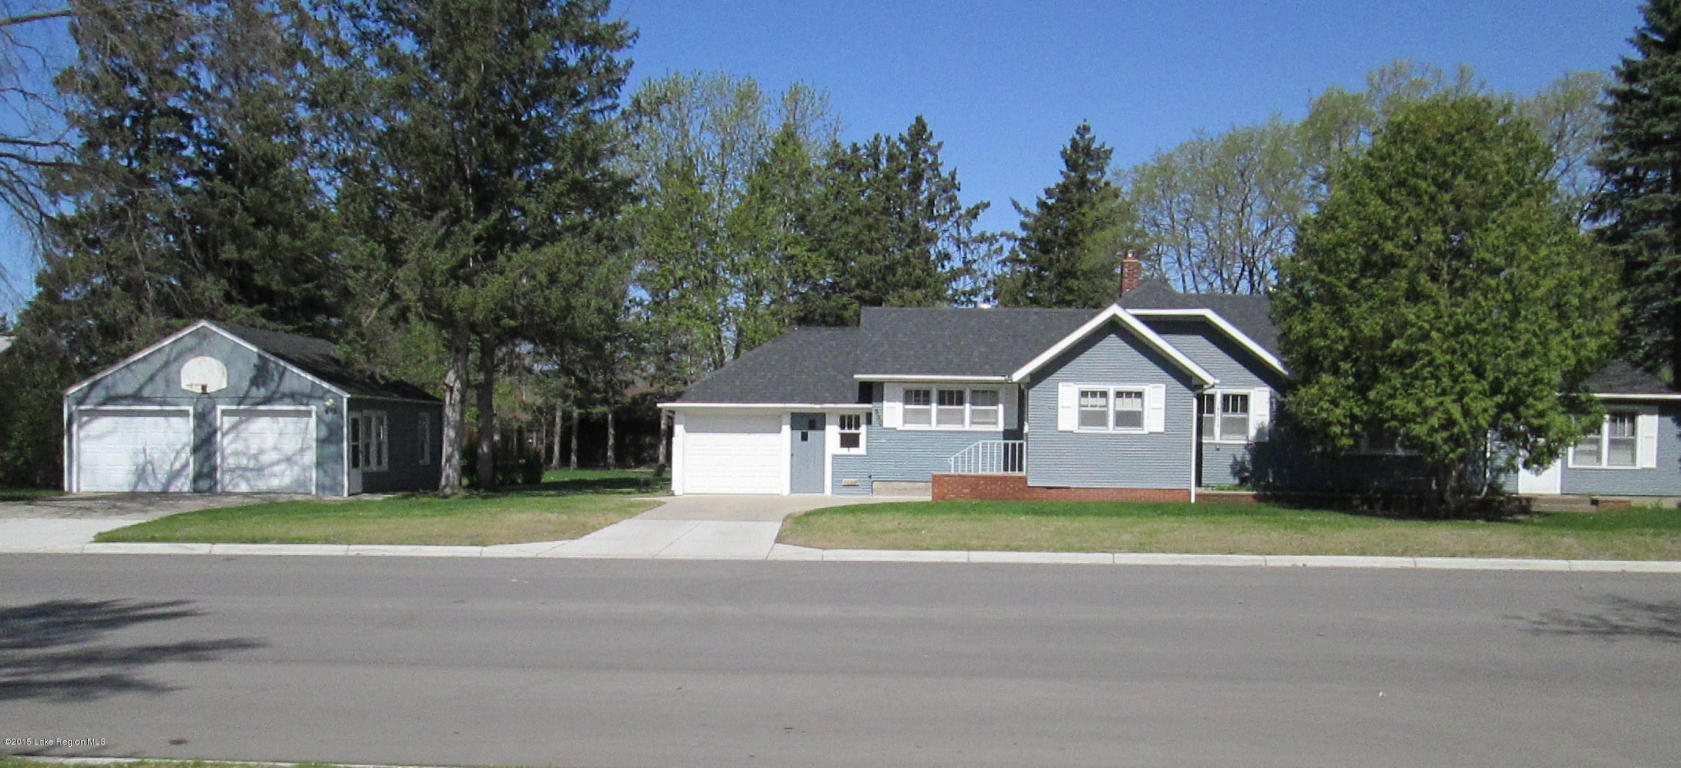 530 3rd Ave SW Perham, MN 56573